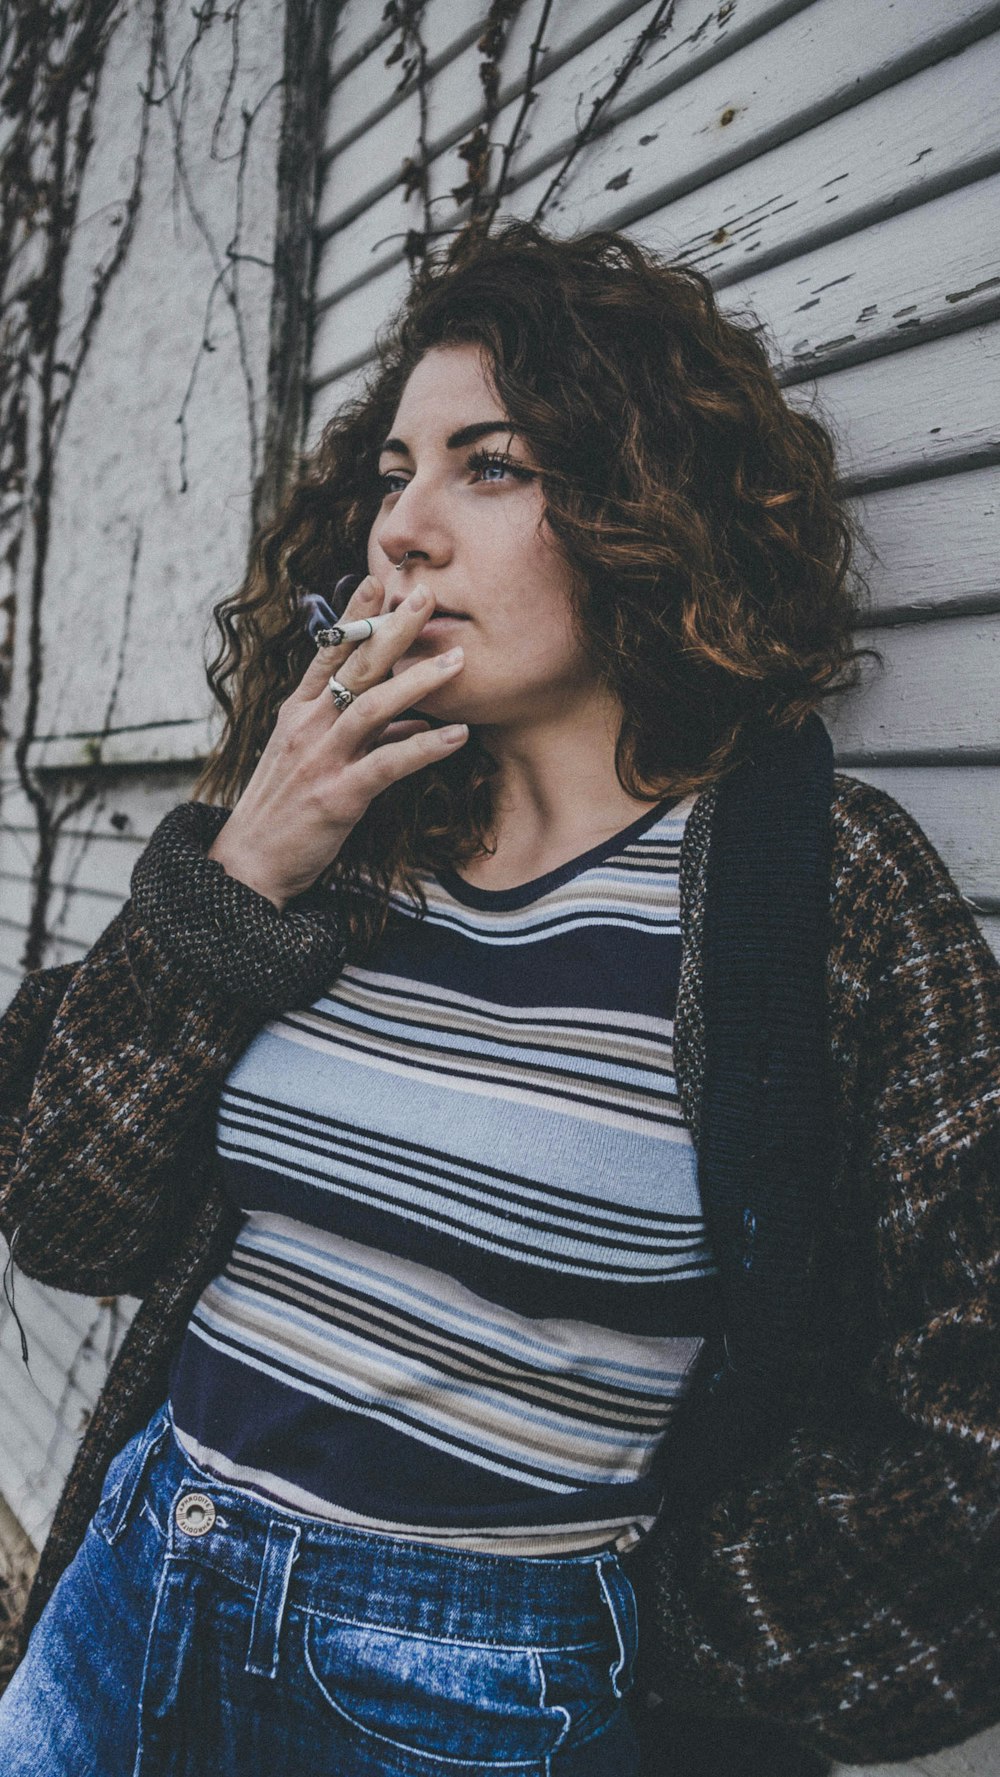 woman in brown and black jacket using cigarette